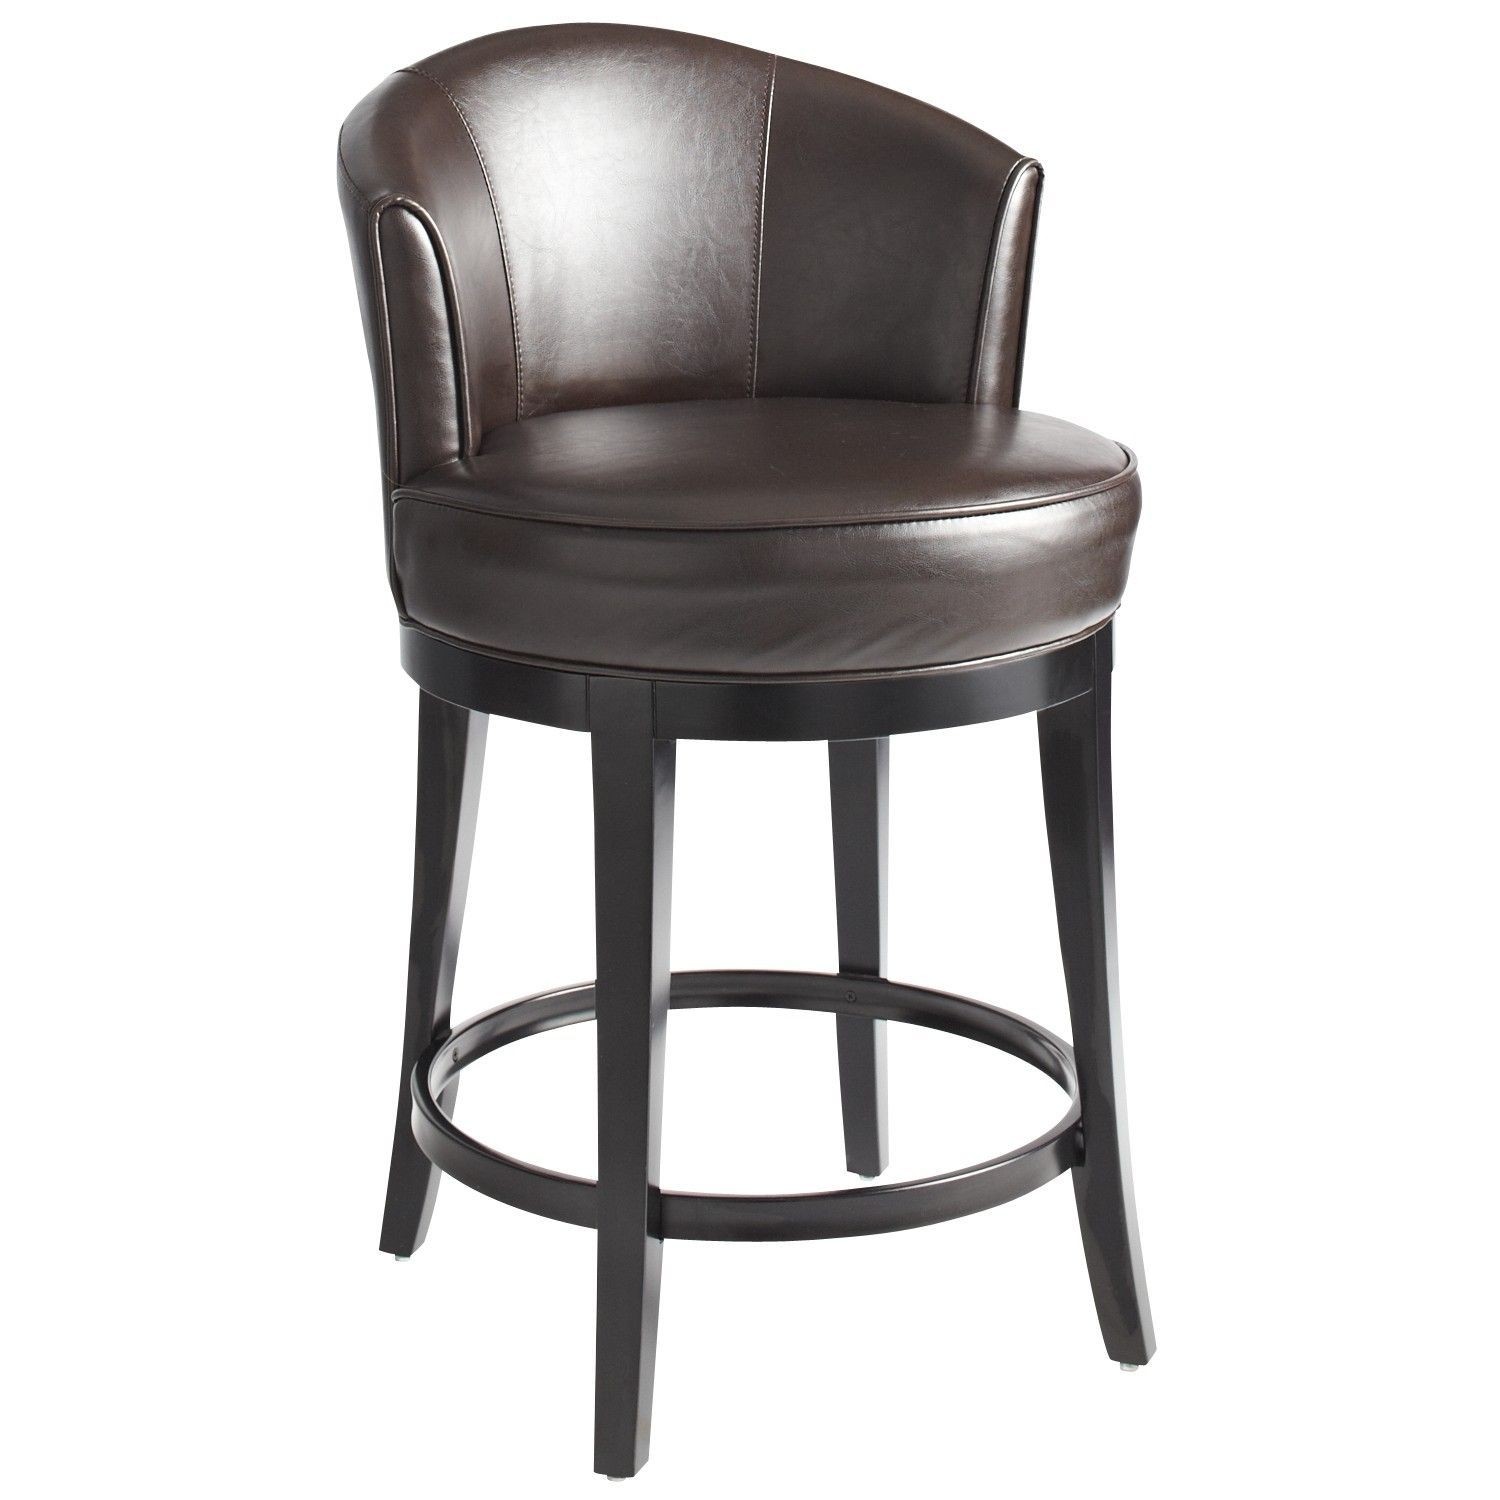 Leather swivel bar stools with back